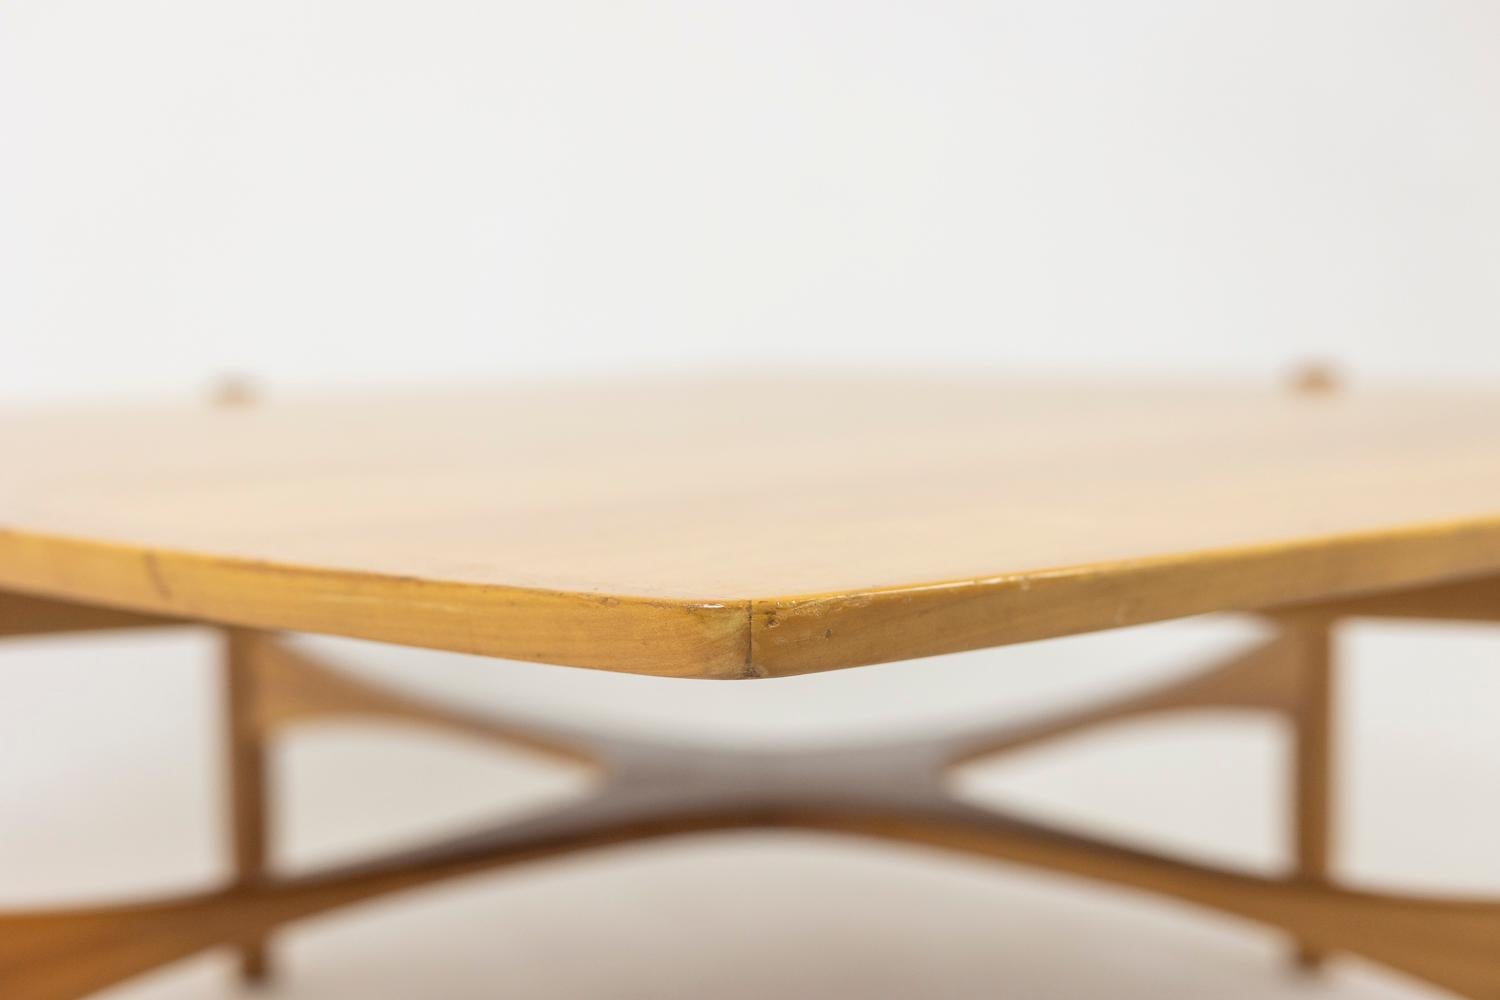 Cherry wood coffee table, square shape.

Danish work realized in the 1970s.